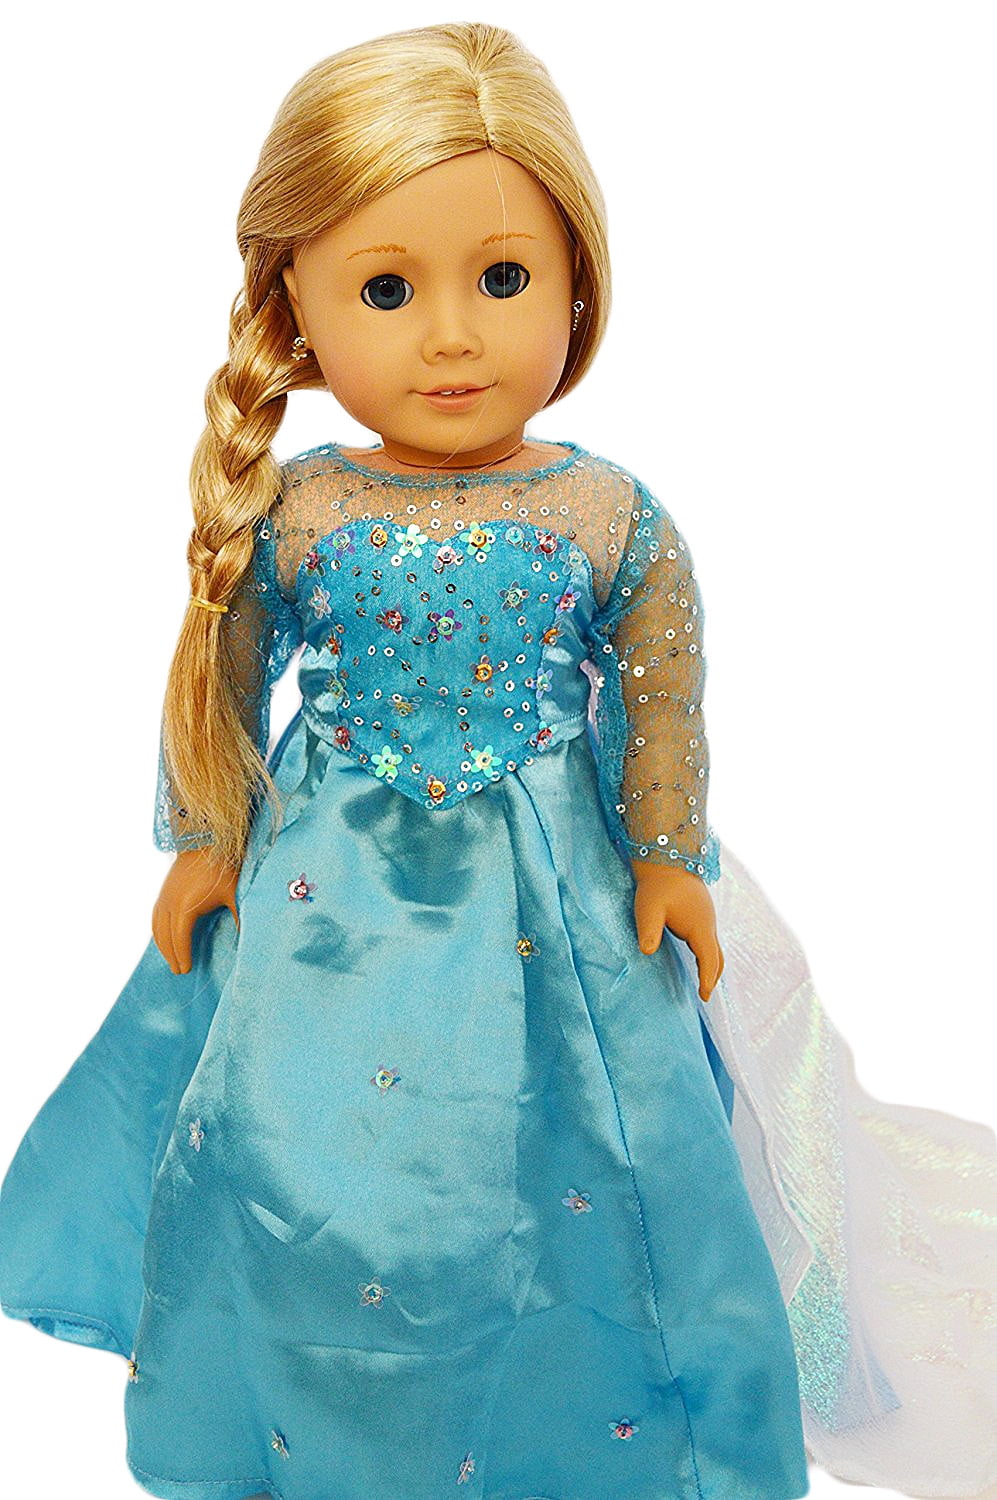 New Sophia Doll Clothes 3 Outfits Set Fits 18" American Girl Type Doll Elsa 